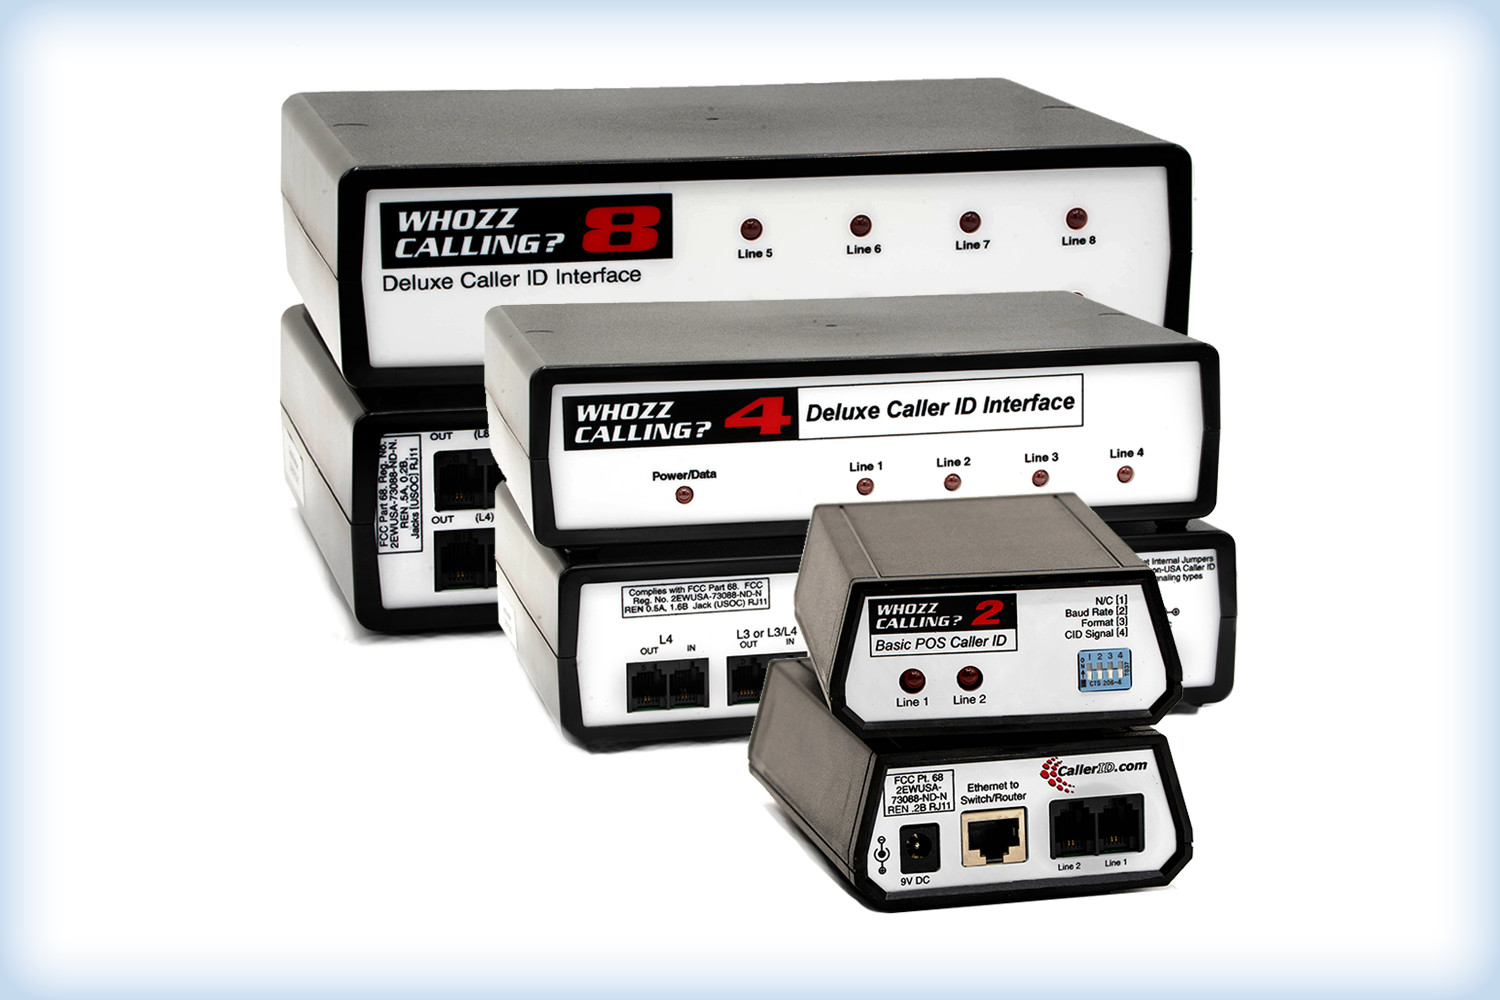 3 sets of products showing the front and back panel of each. The 2 line Basic POS, 4 and 8 line varients of the Deluxe series. Connections are RJ14 port for each phone line, power, and RJ45 ethernet. The 2 line model has a set of 4 swtiches for configuration